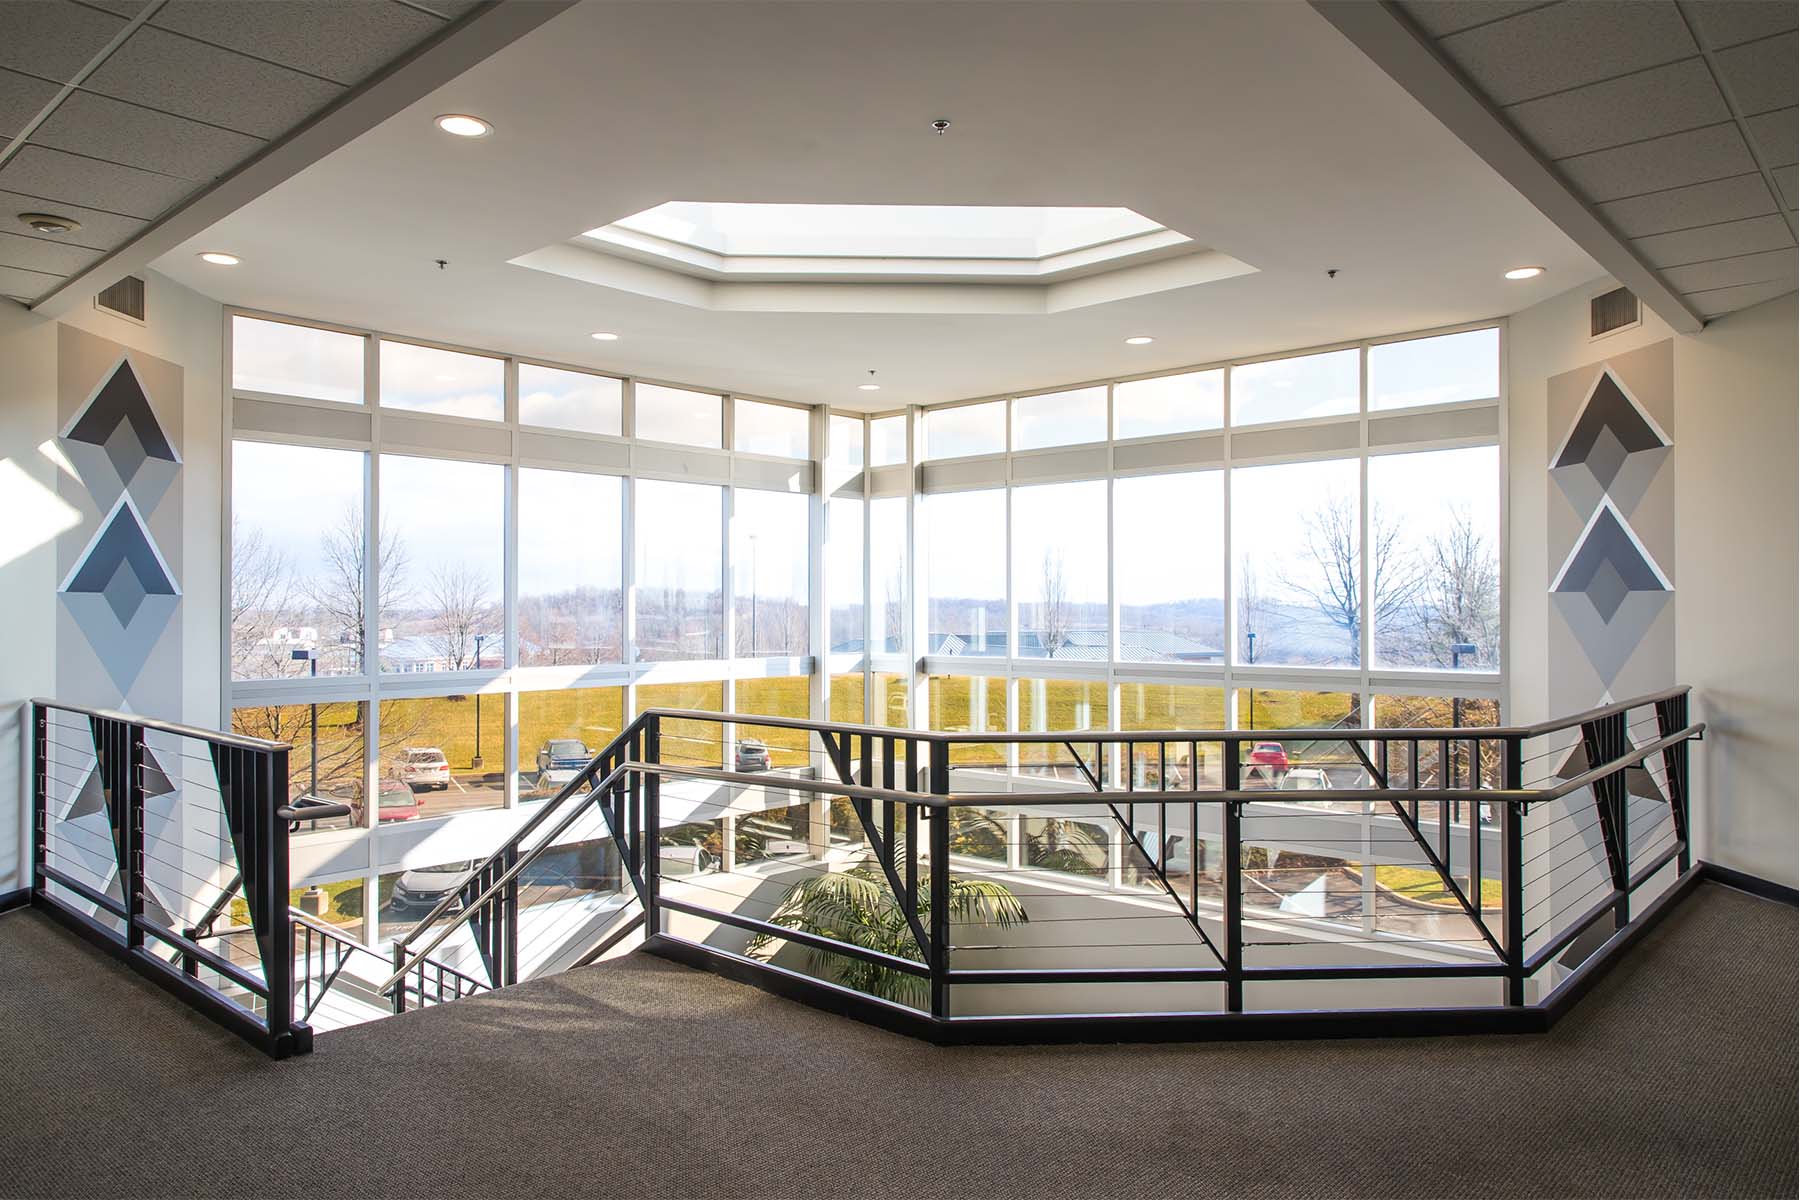 Stealth technology center interior multi-level lobby with large windows